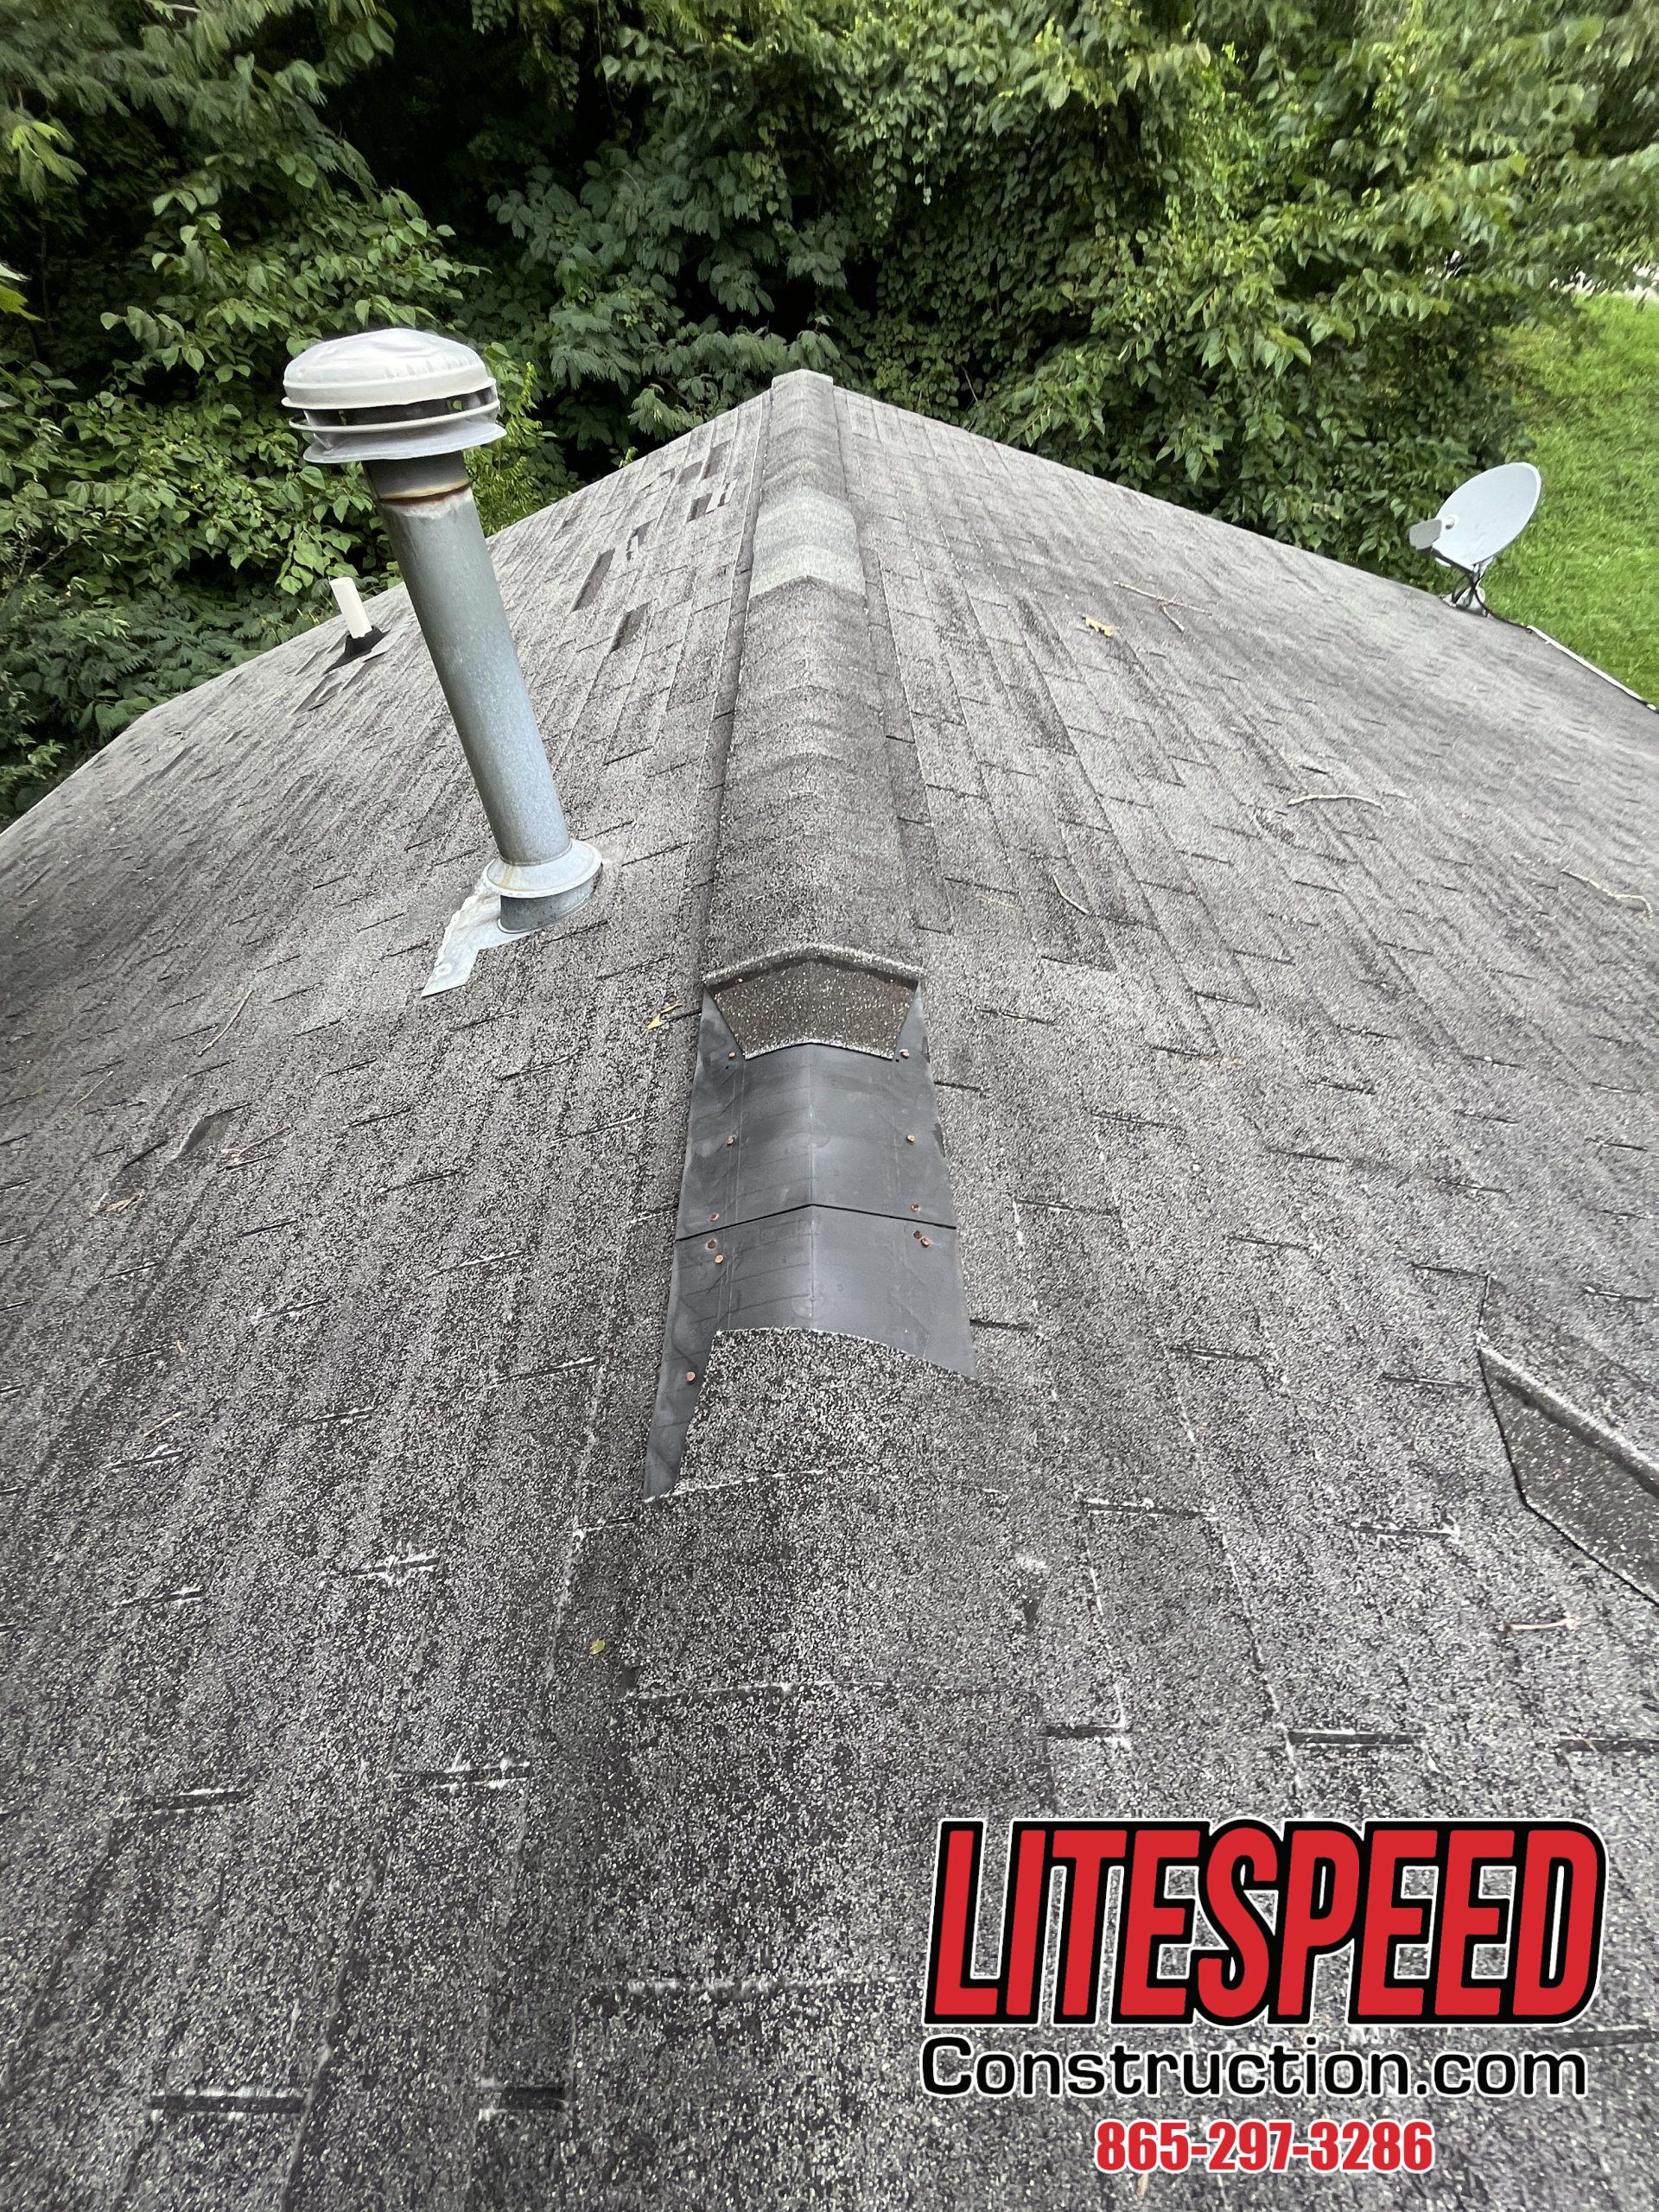 This is a picture of missing ridge cap shingles on a black roof